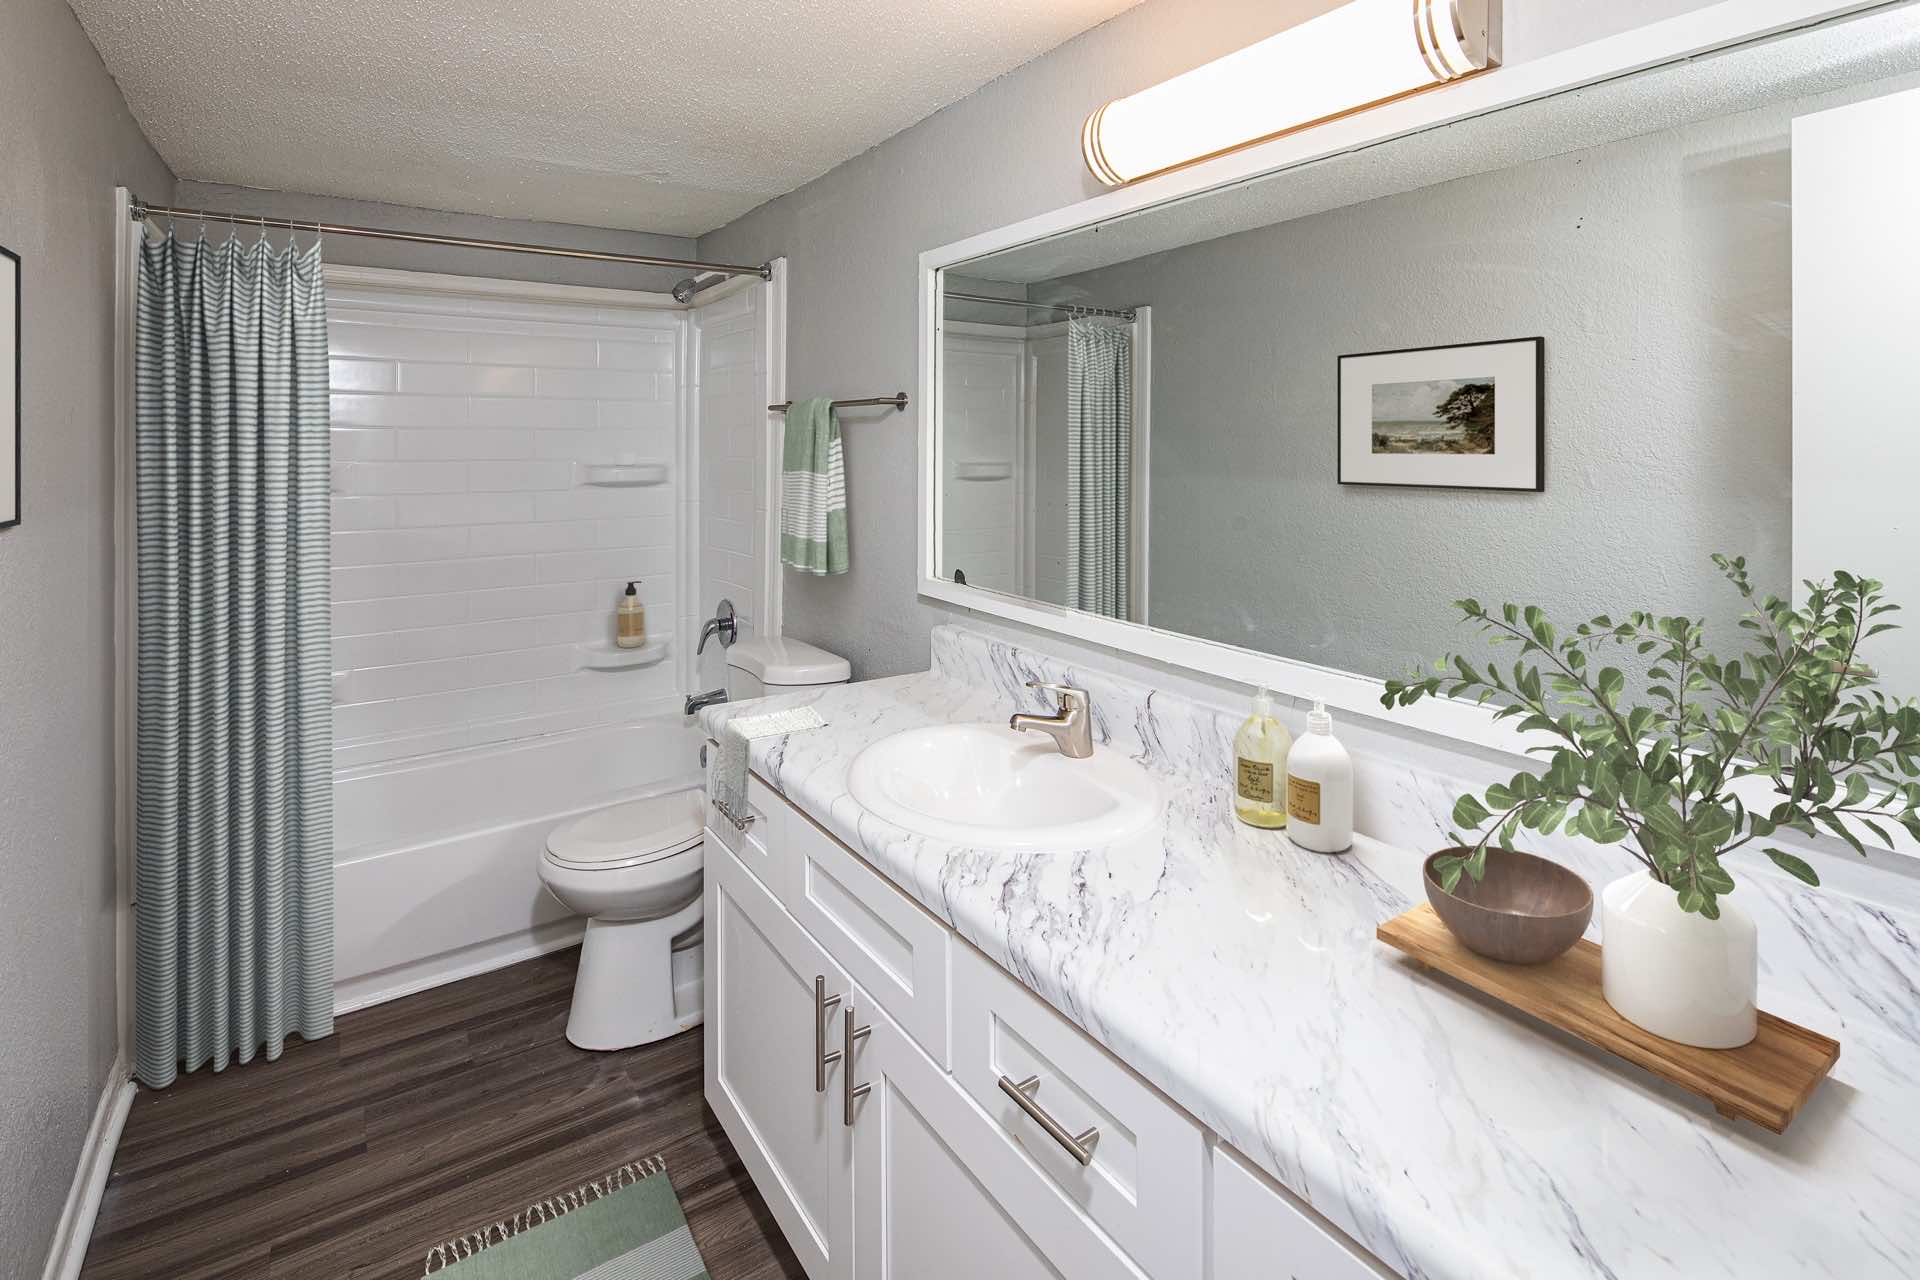 bathroom with wood-style flooring and ample lighting